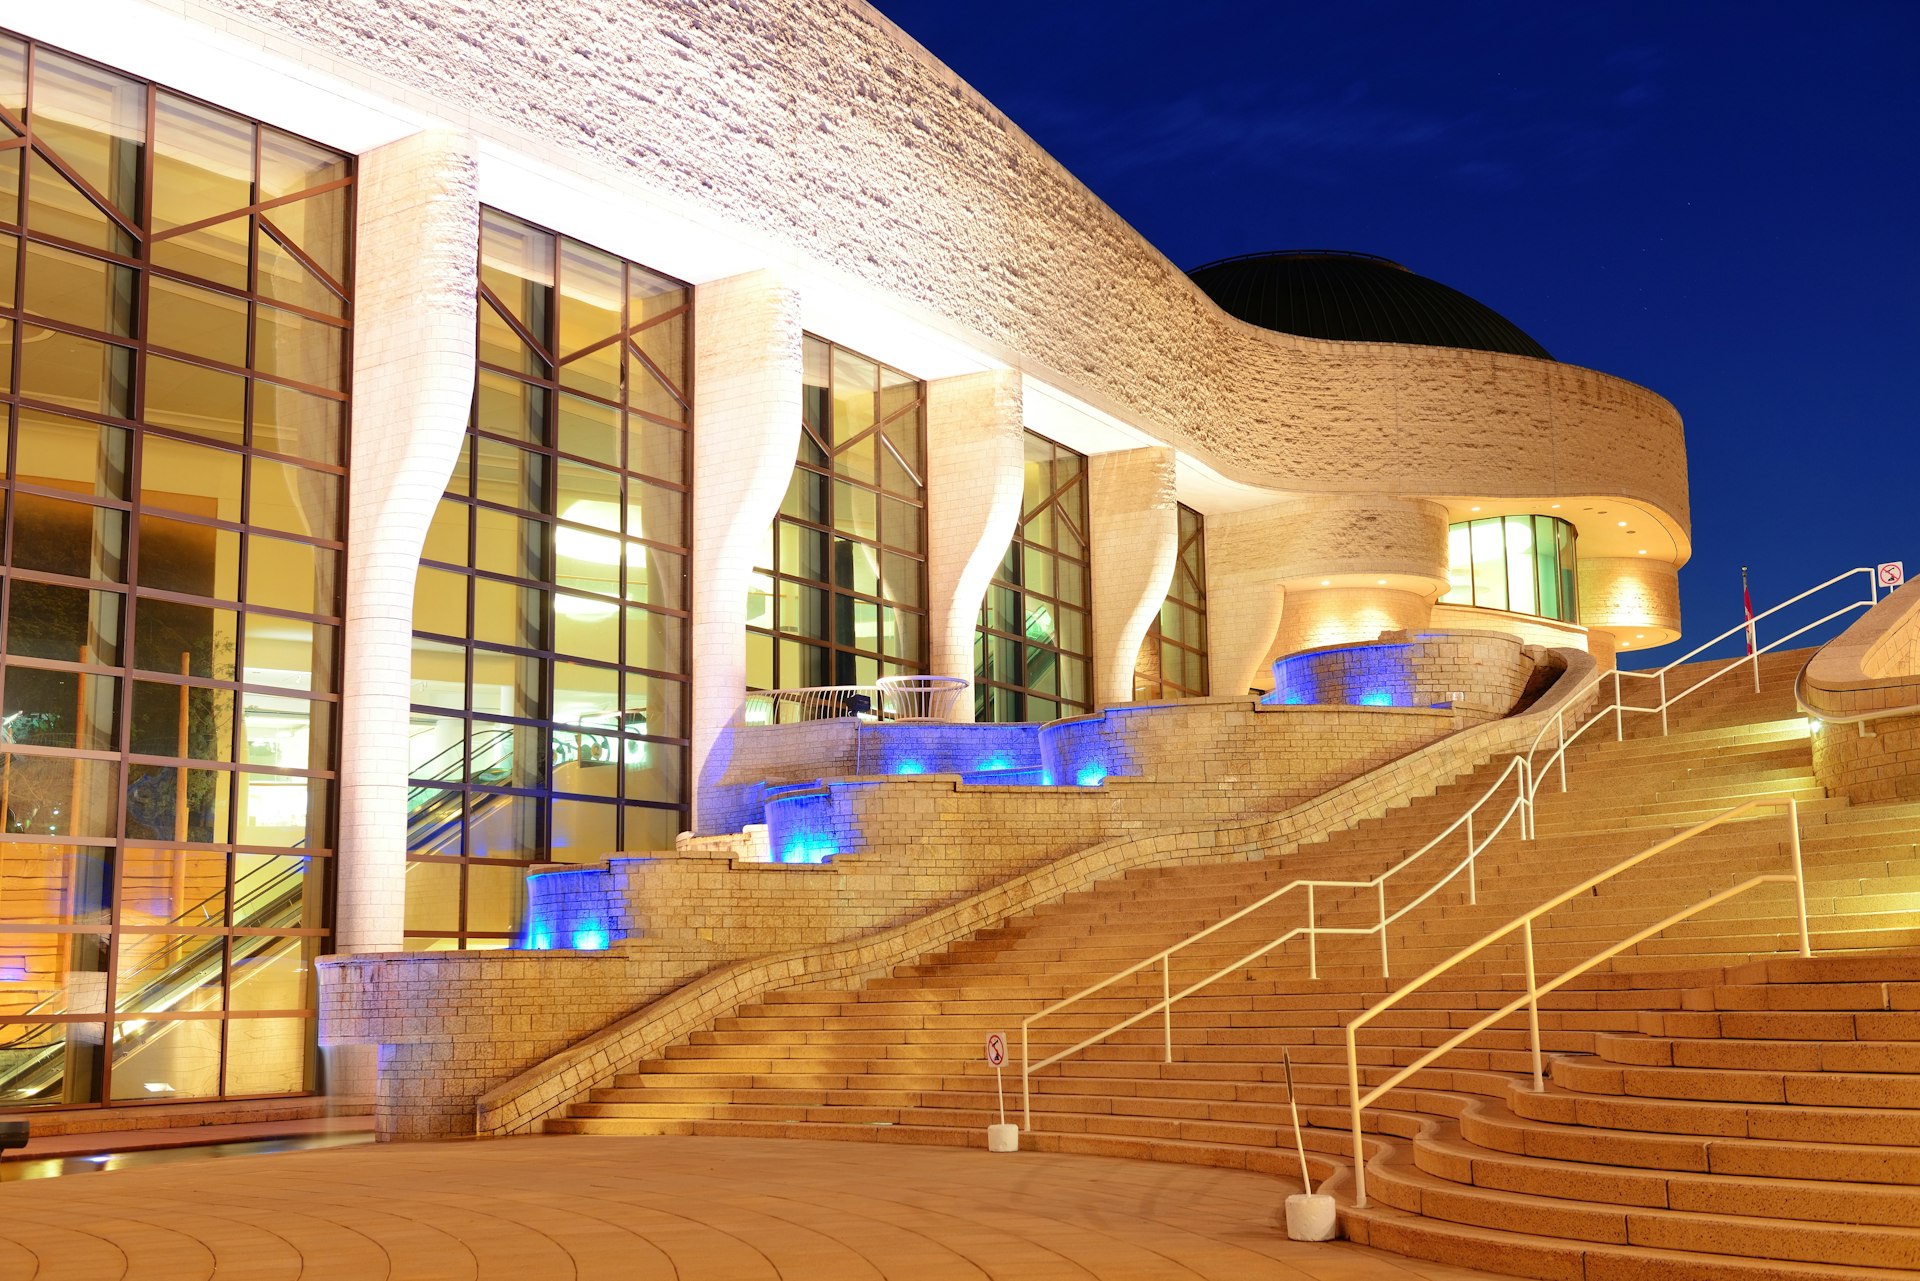 Steps in front of a brightly lit museum building at night. 